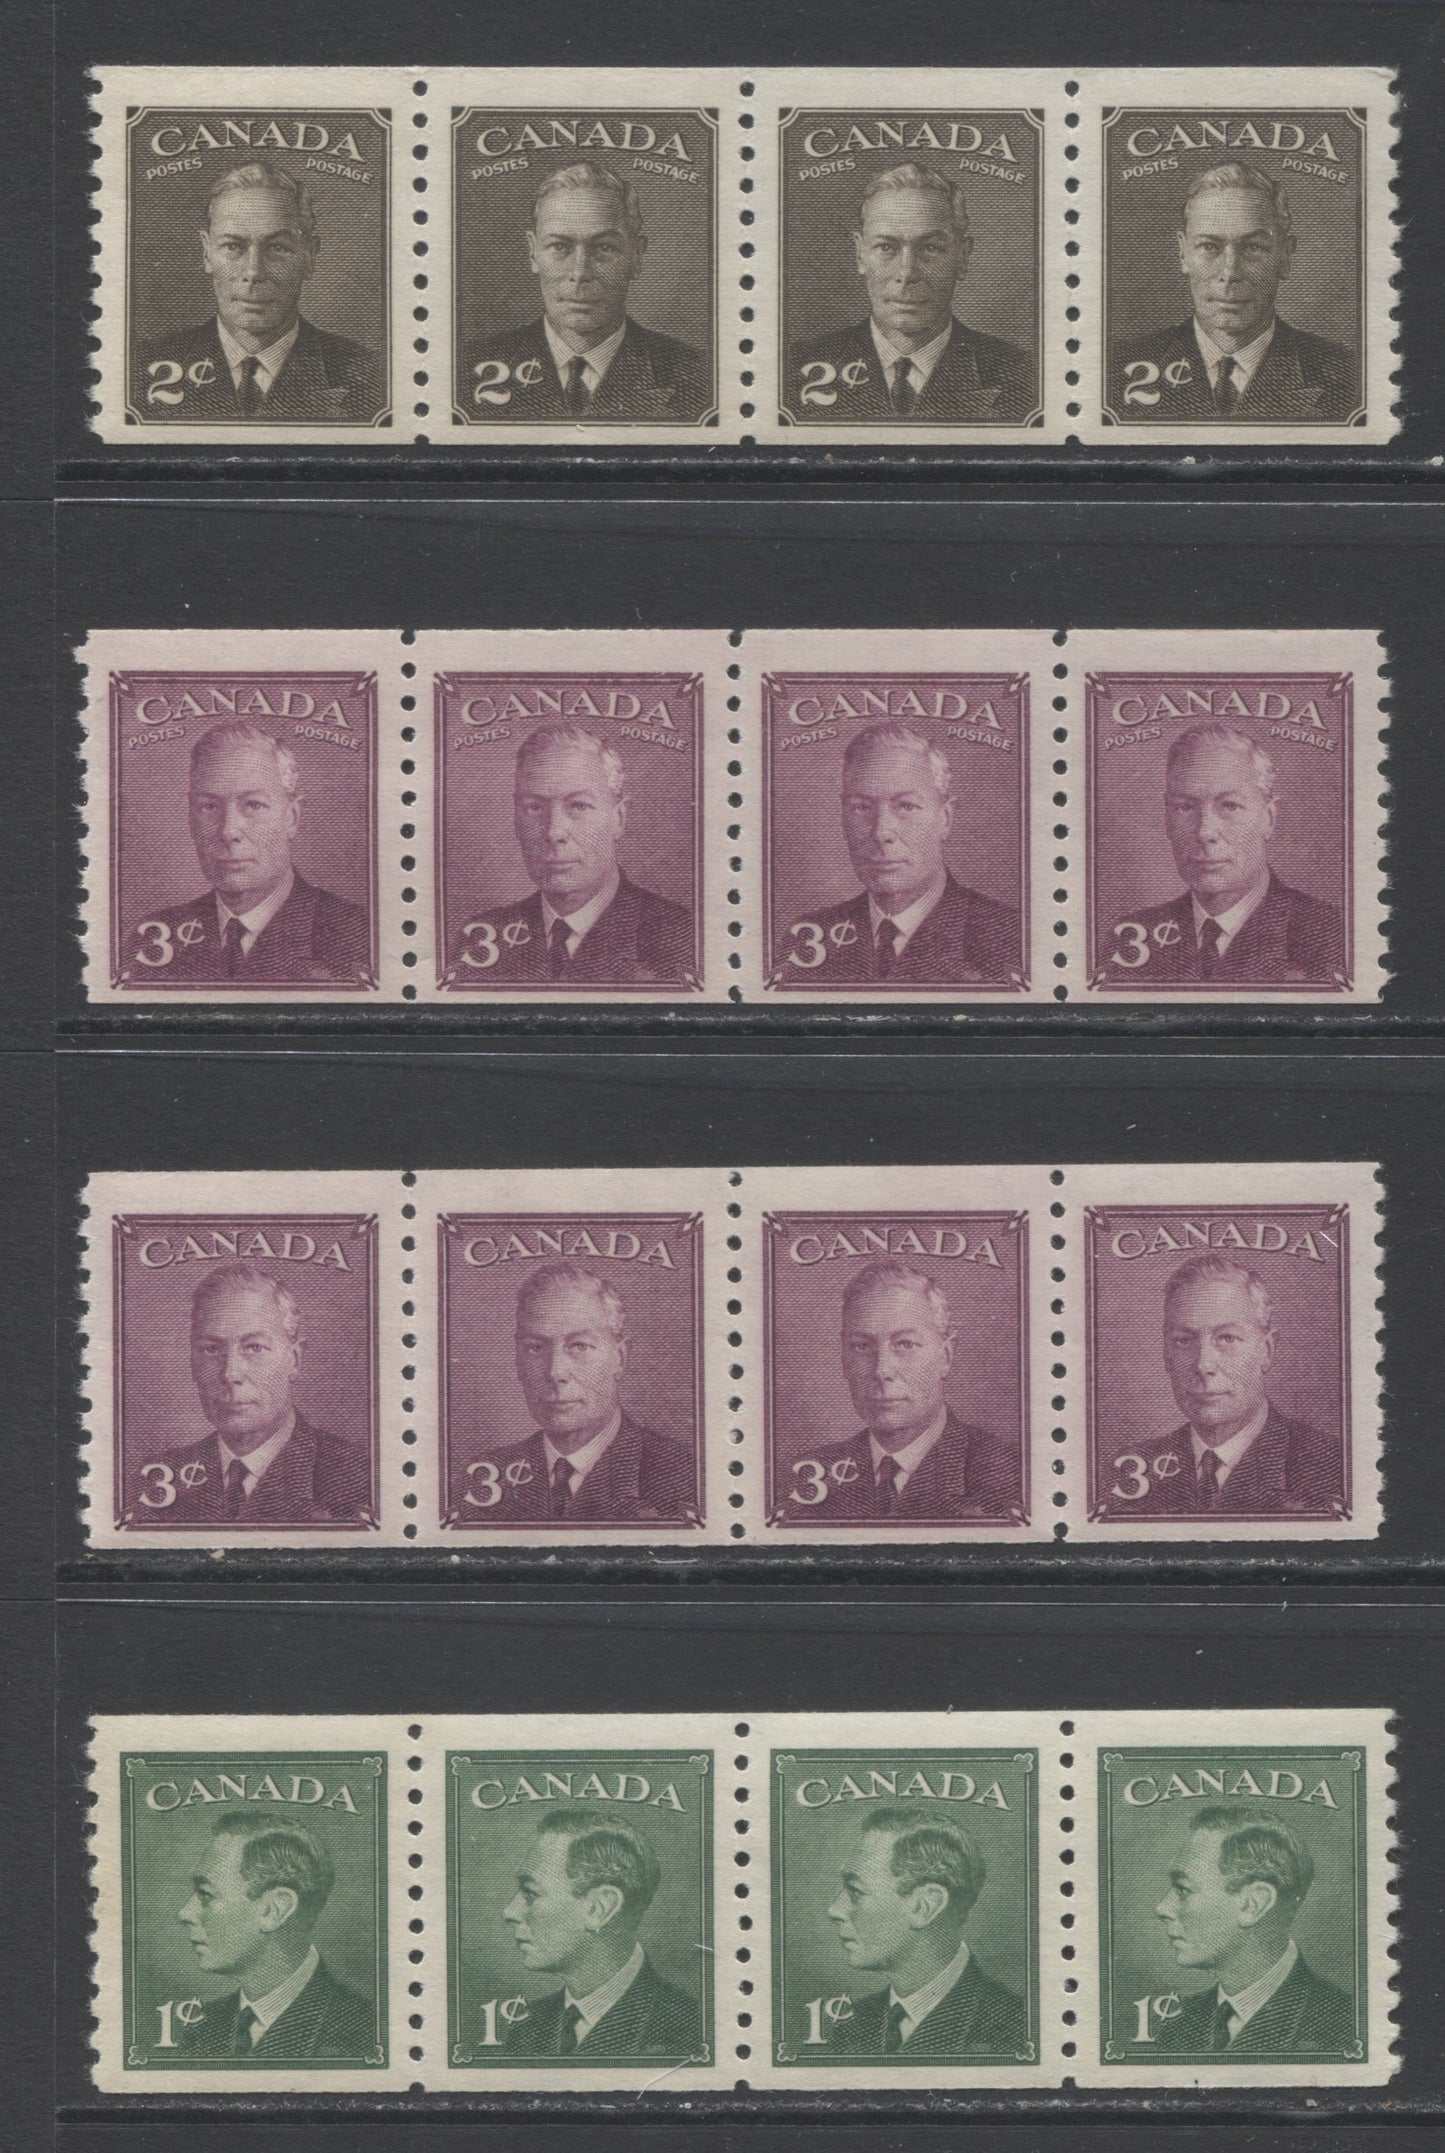 Lot 309 Canada #295-296, 298-299 1c-3c Green - Rose Violet King George VI, 1949-1951 Postes-Postage & Postes-Postage Omitted Coil Issues, 4 F/VFNH Coil Strips Of 4 On Horizontal Wove & Vertical Ribbed Papers With Cream Gum